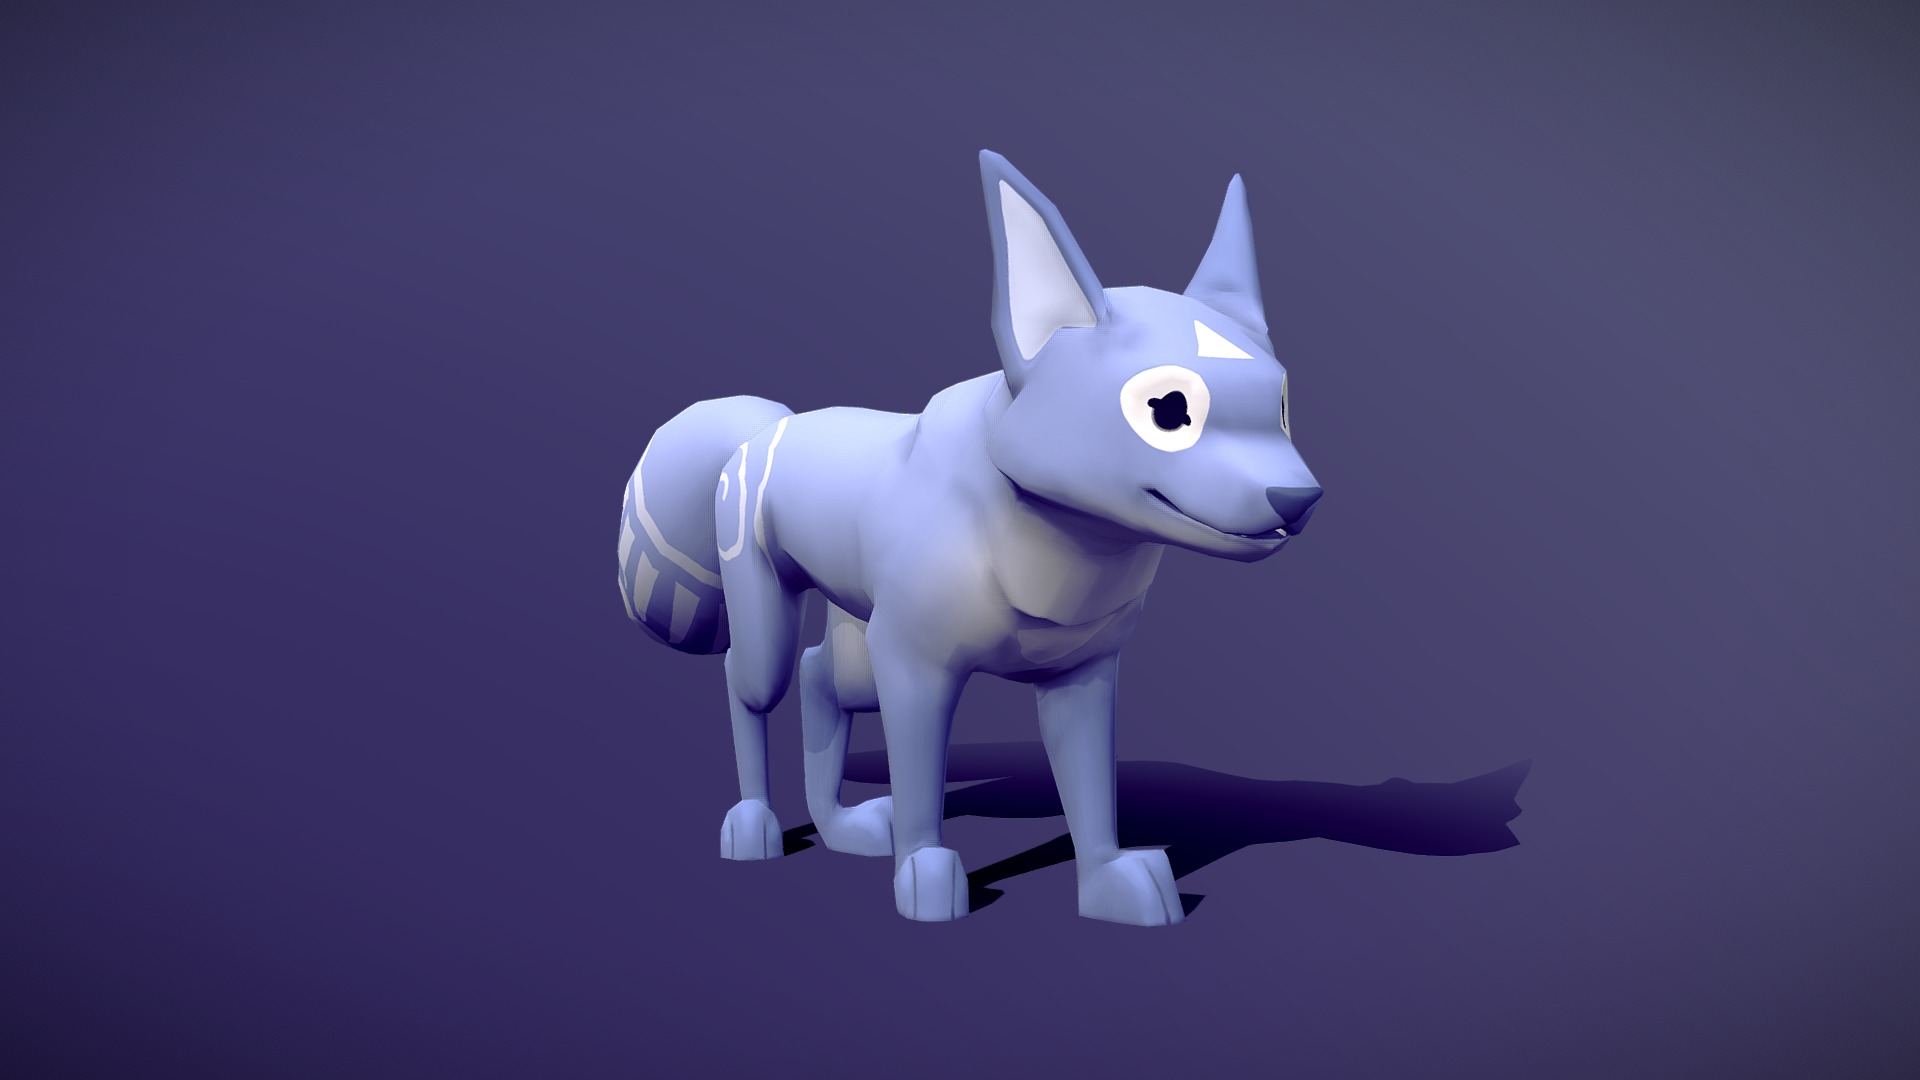 I created this model using a rig and animated set from the Unity Store for the game Adventurous!

I loved working on this model! The concept is too cute ♥ The challenges came in the rigging part of the process where I had to match a rig and animations to a model that had different proportions.

Check out more of Adventurous here - https://twitter.com/adventurousco - Adventurous - Fox - 3D model by Heather Bea (@Heather_Bea) 3d model